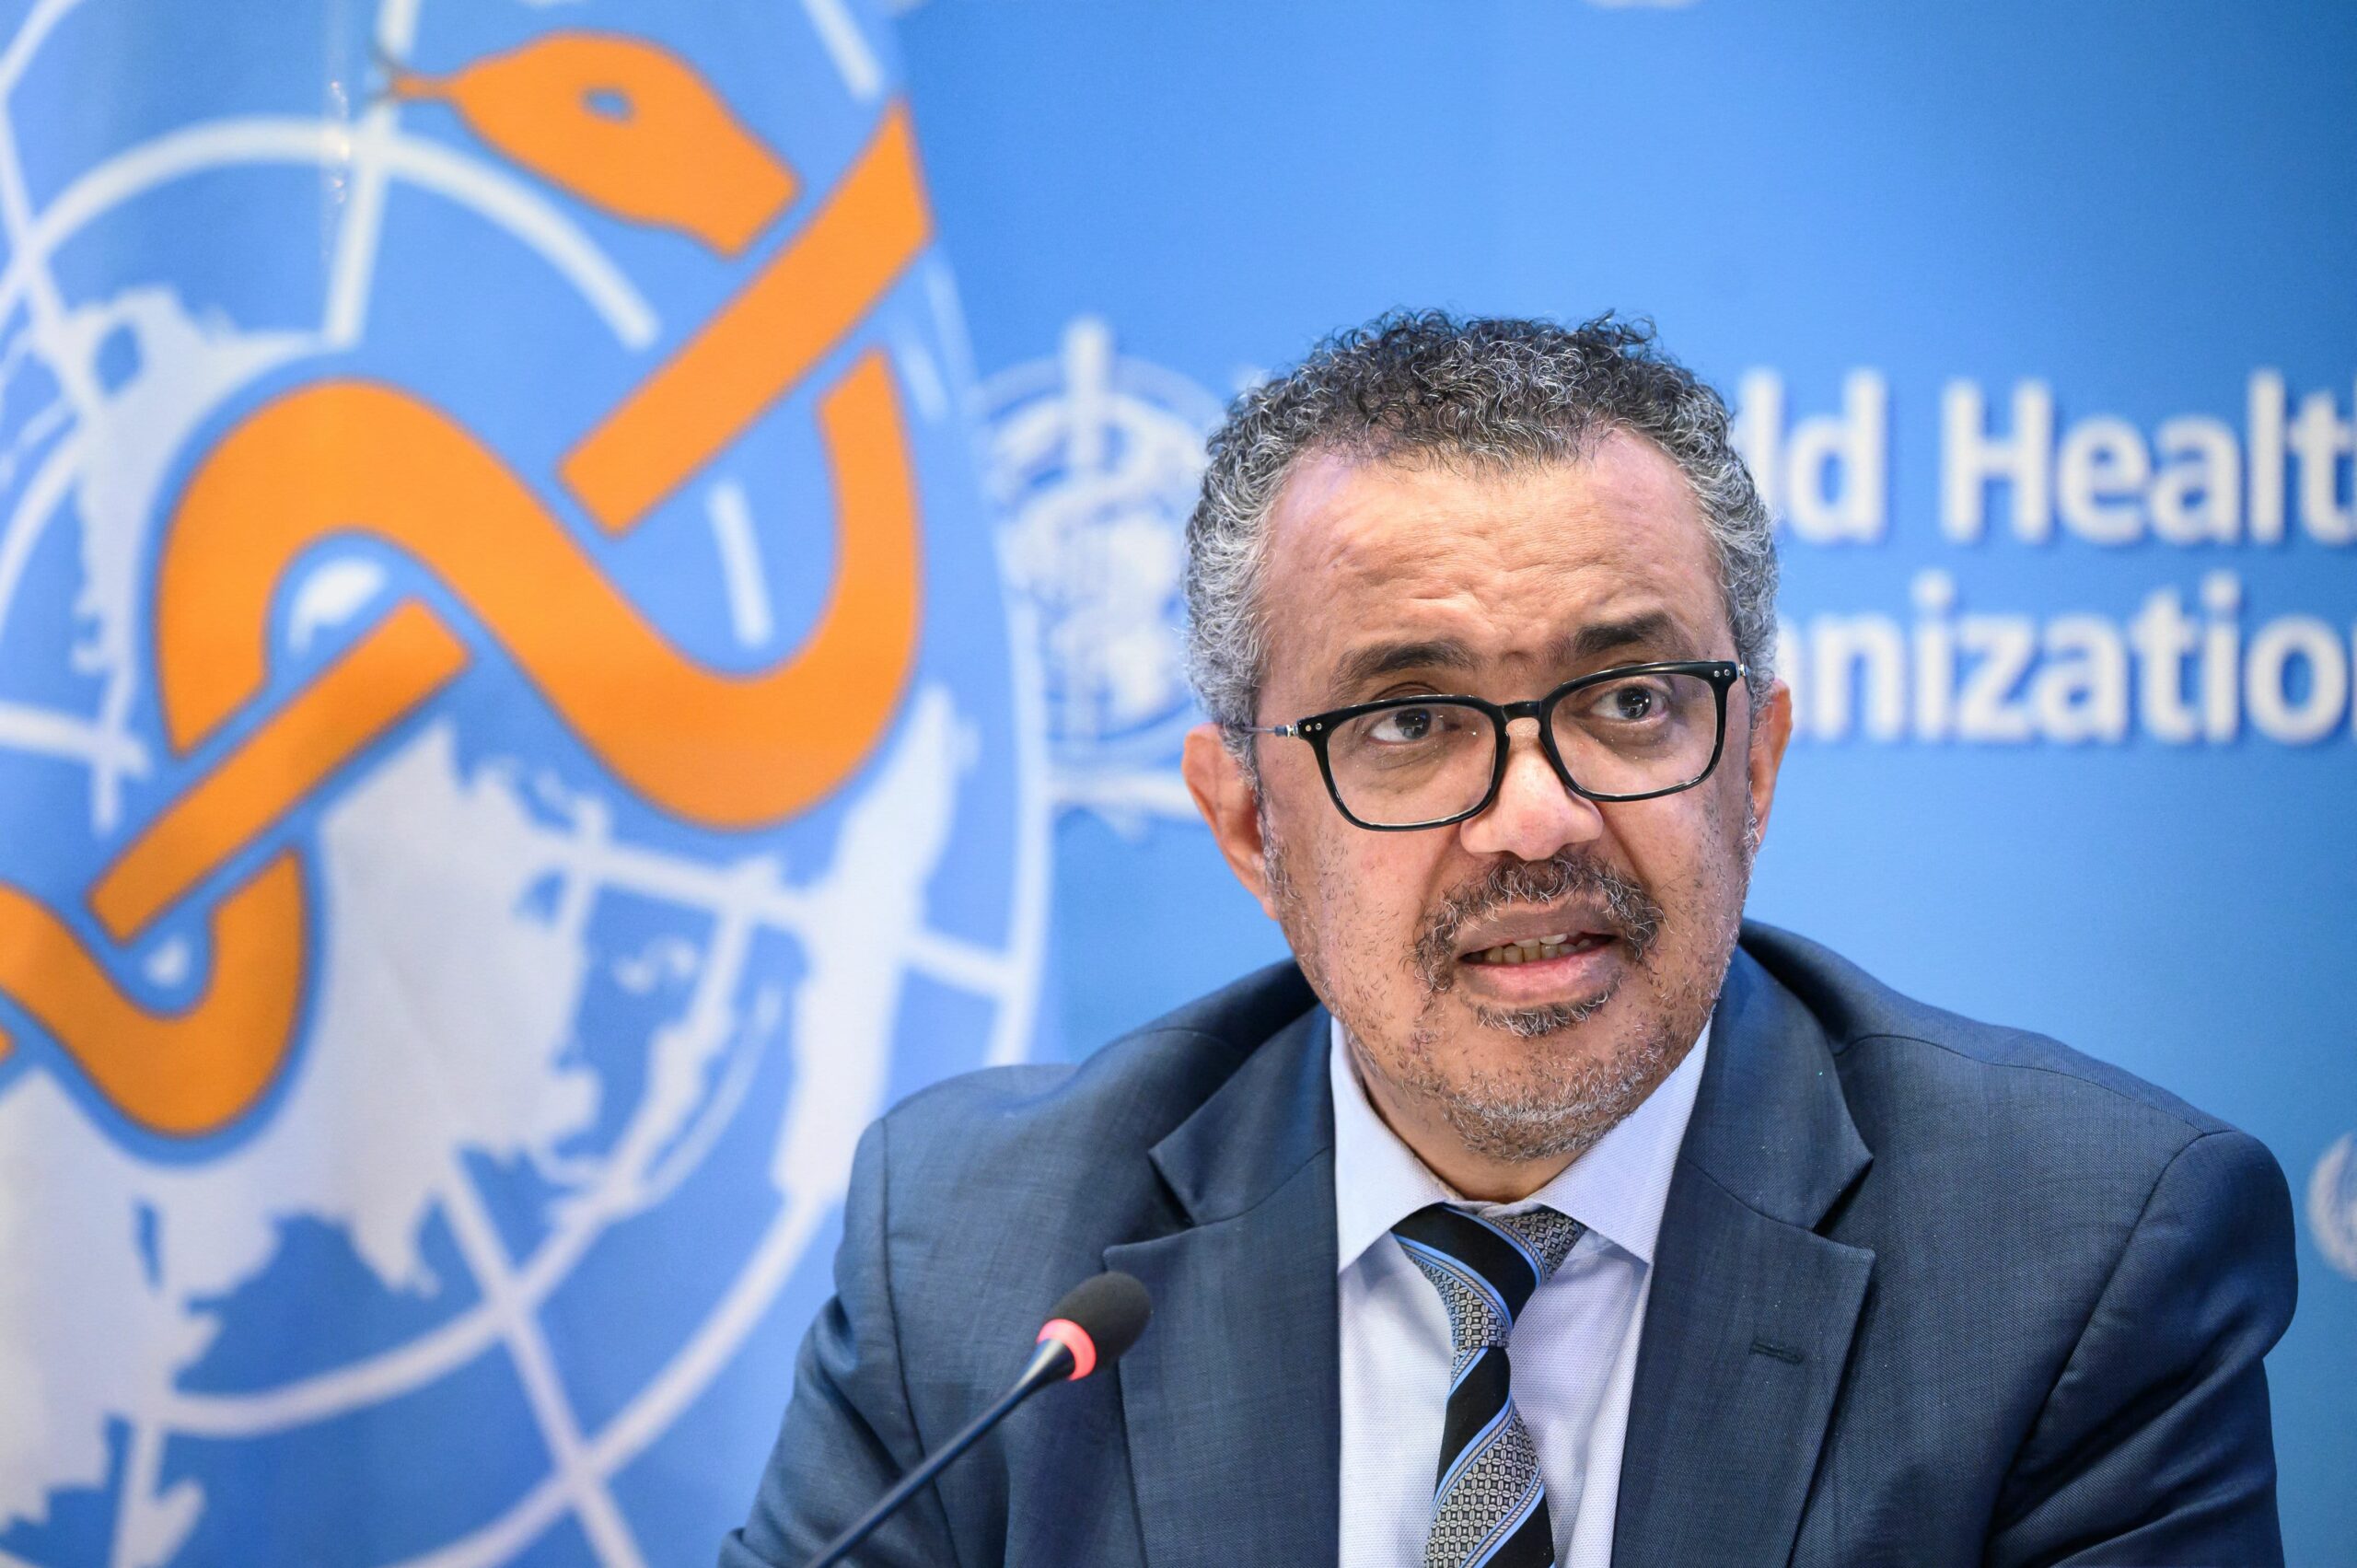 Covid pandemic at a ‘critical juncture,’ WHO’s Tedros says